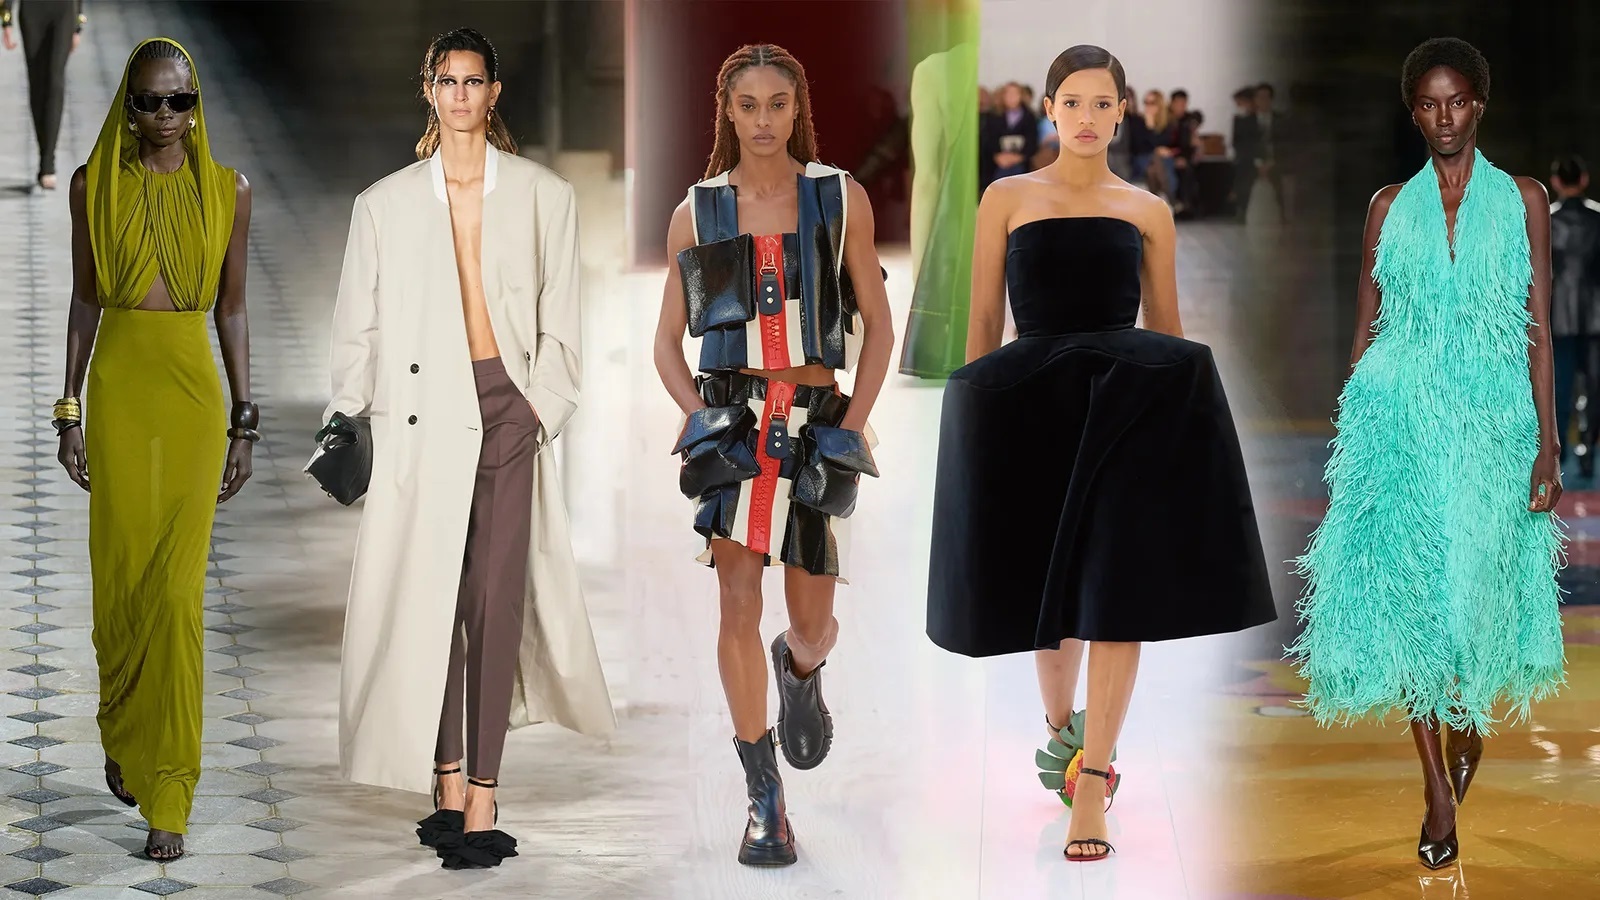 what are the top 5 fashion trends in 2023?